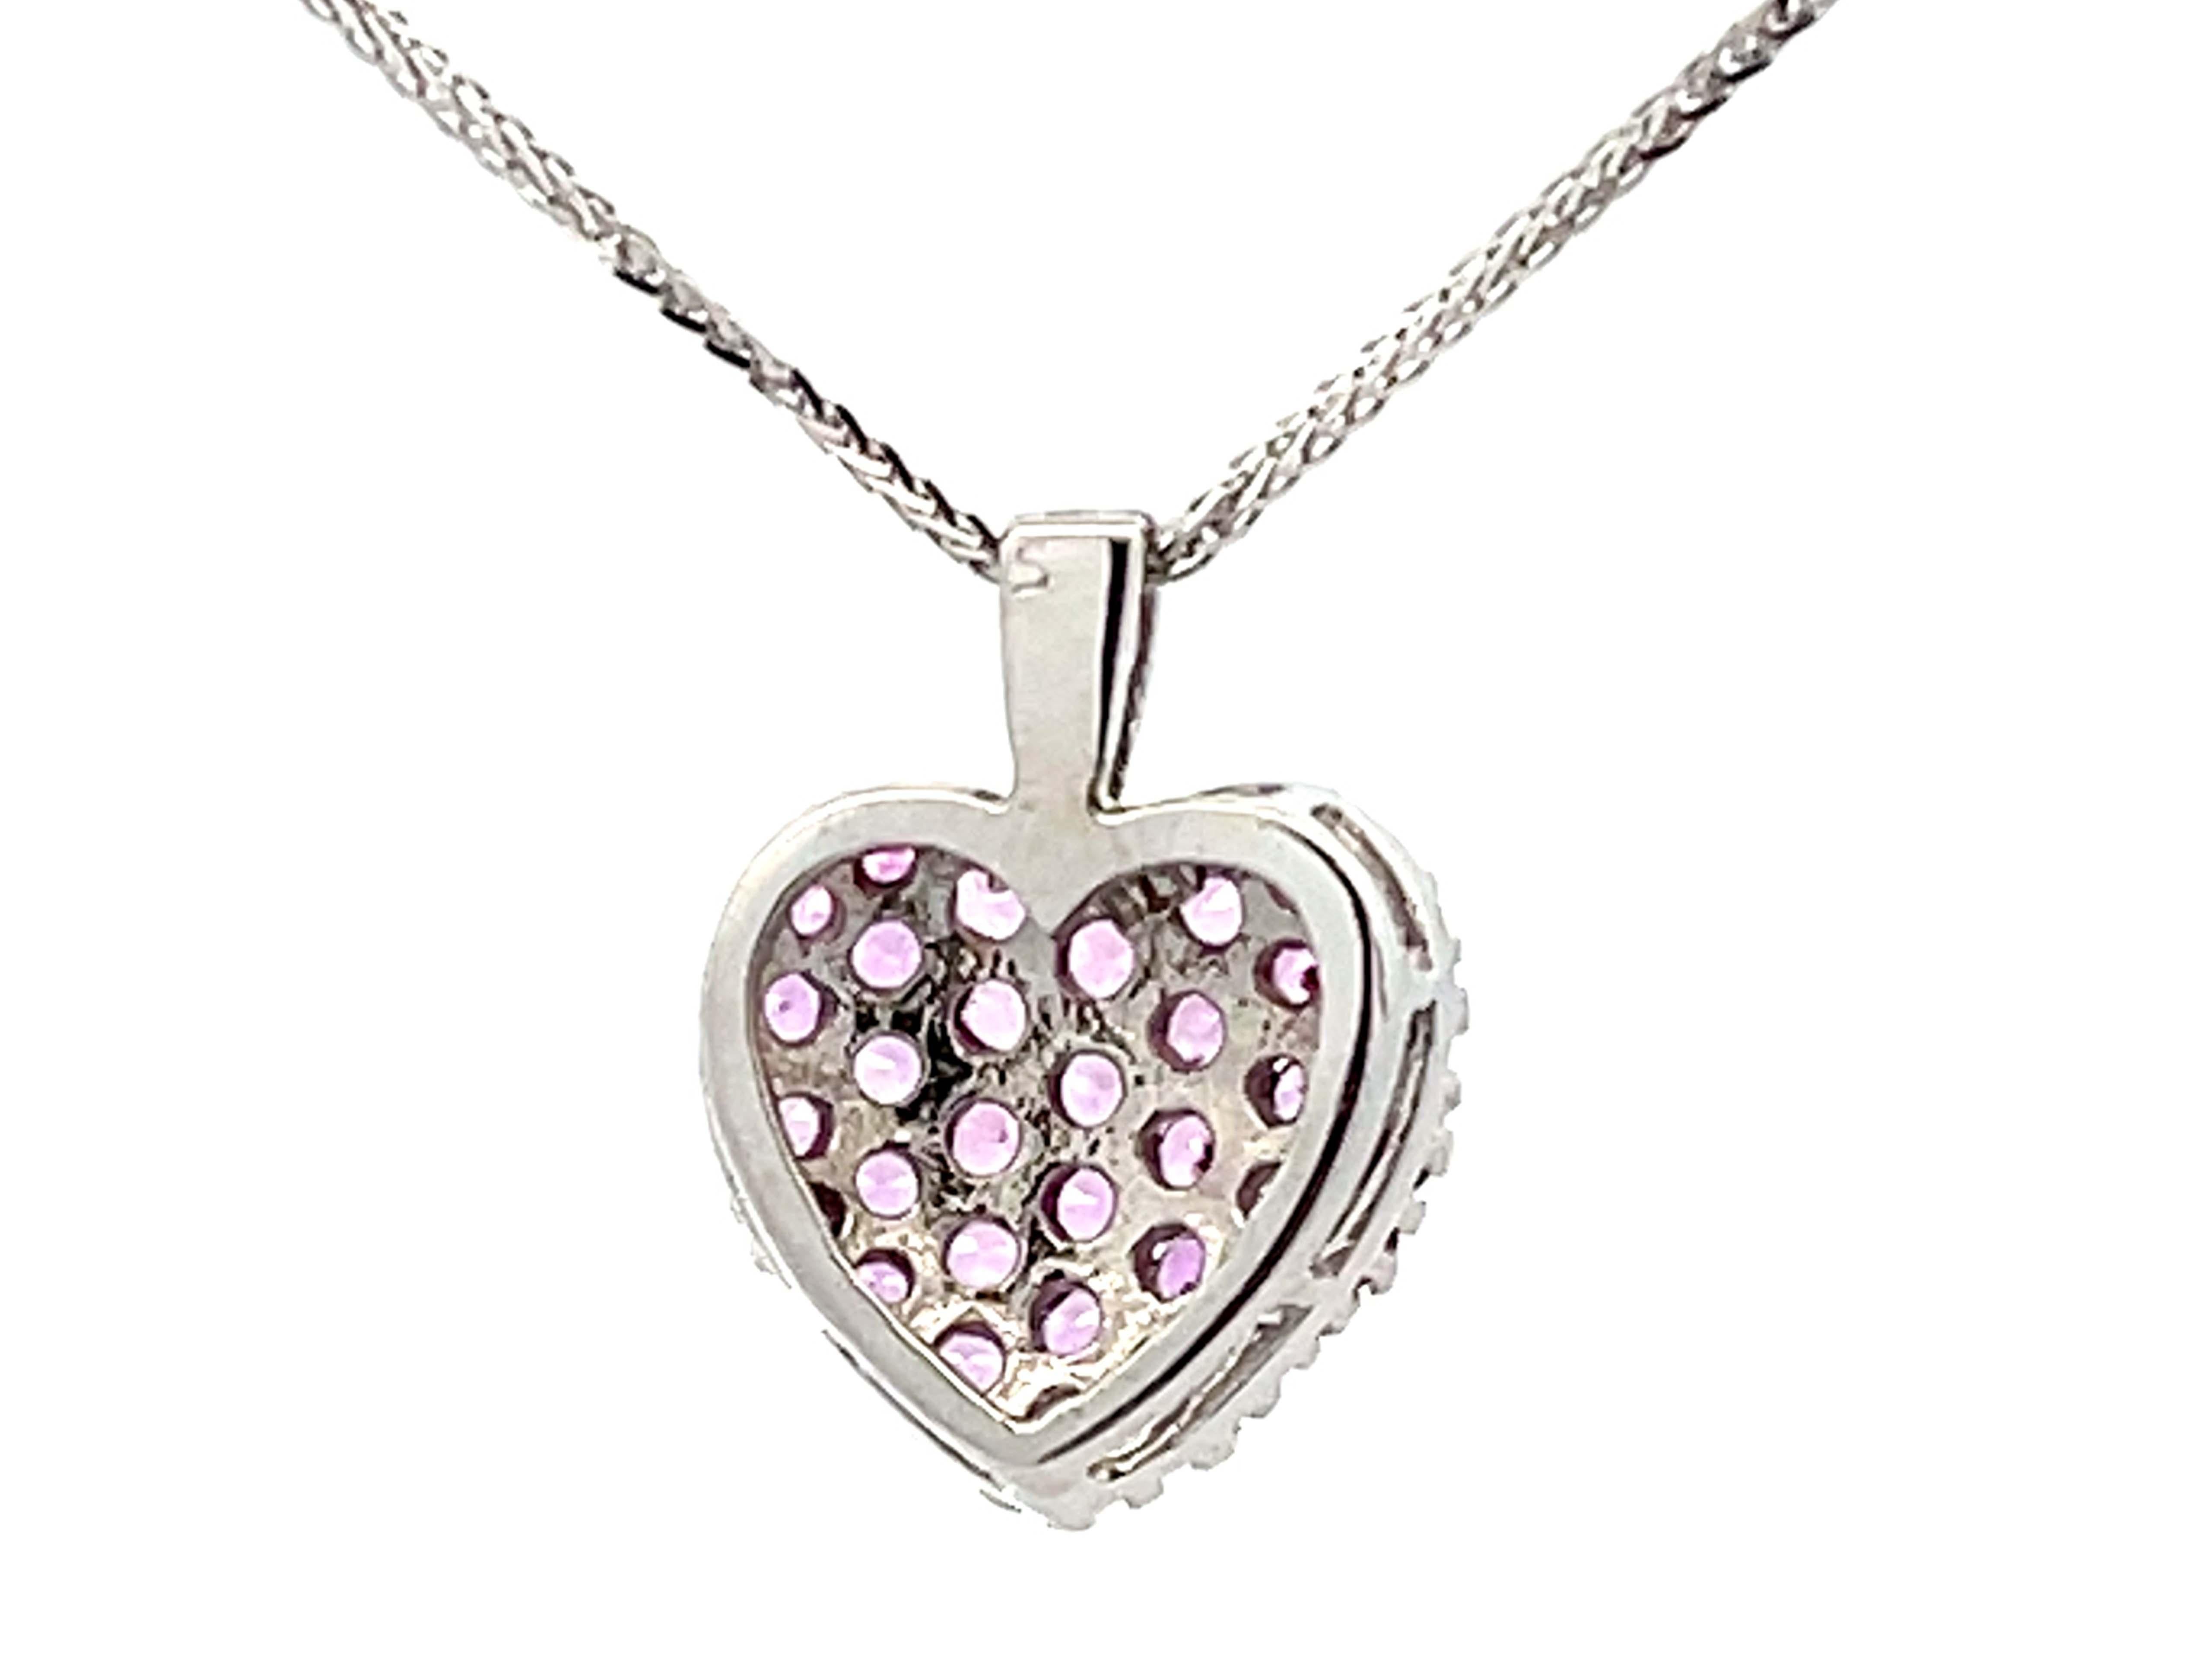 Pink Topaz and Diamond Heart Necklace 14K White Gold For Sale 1